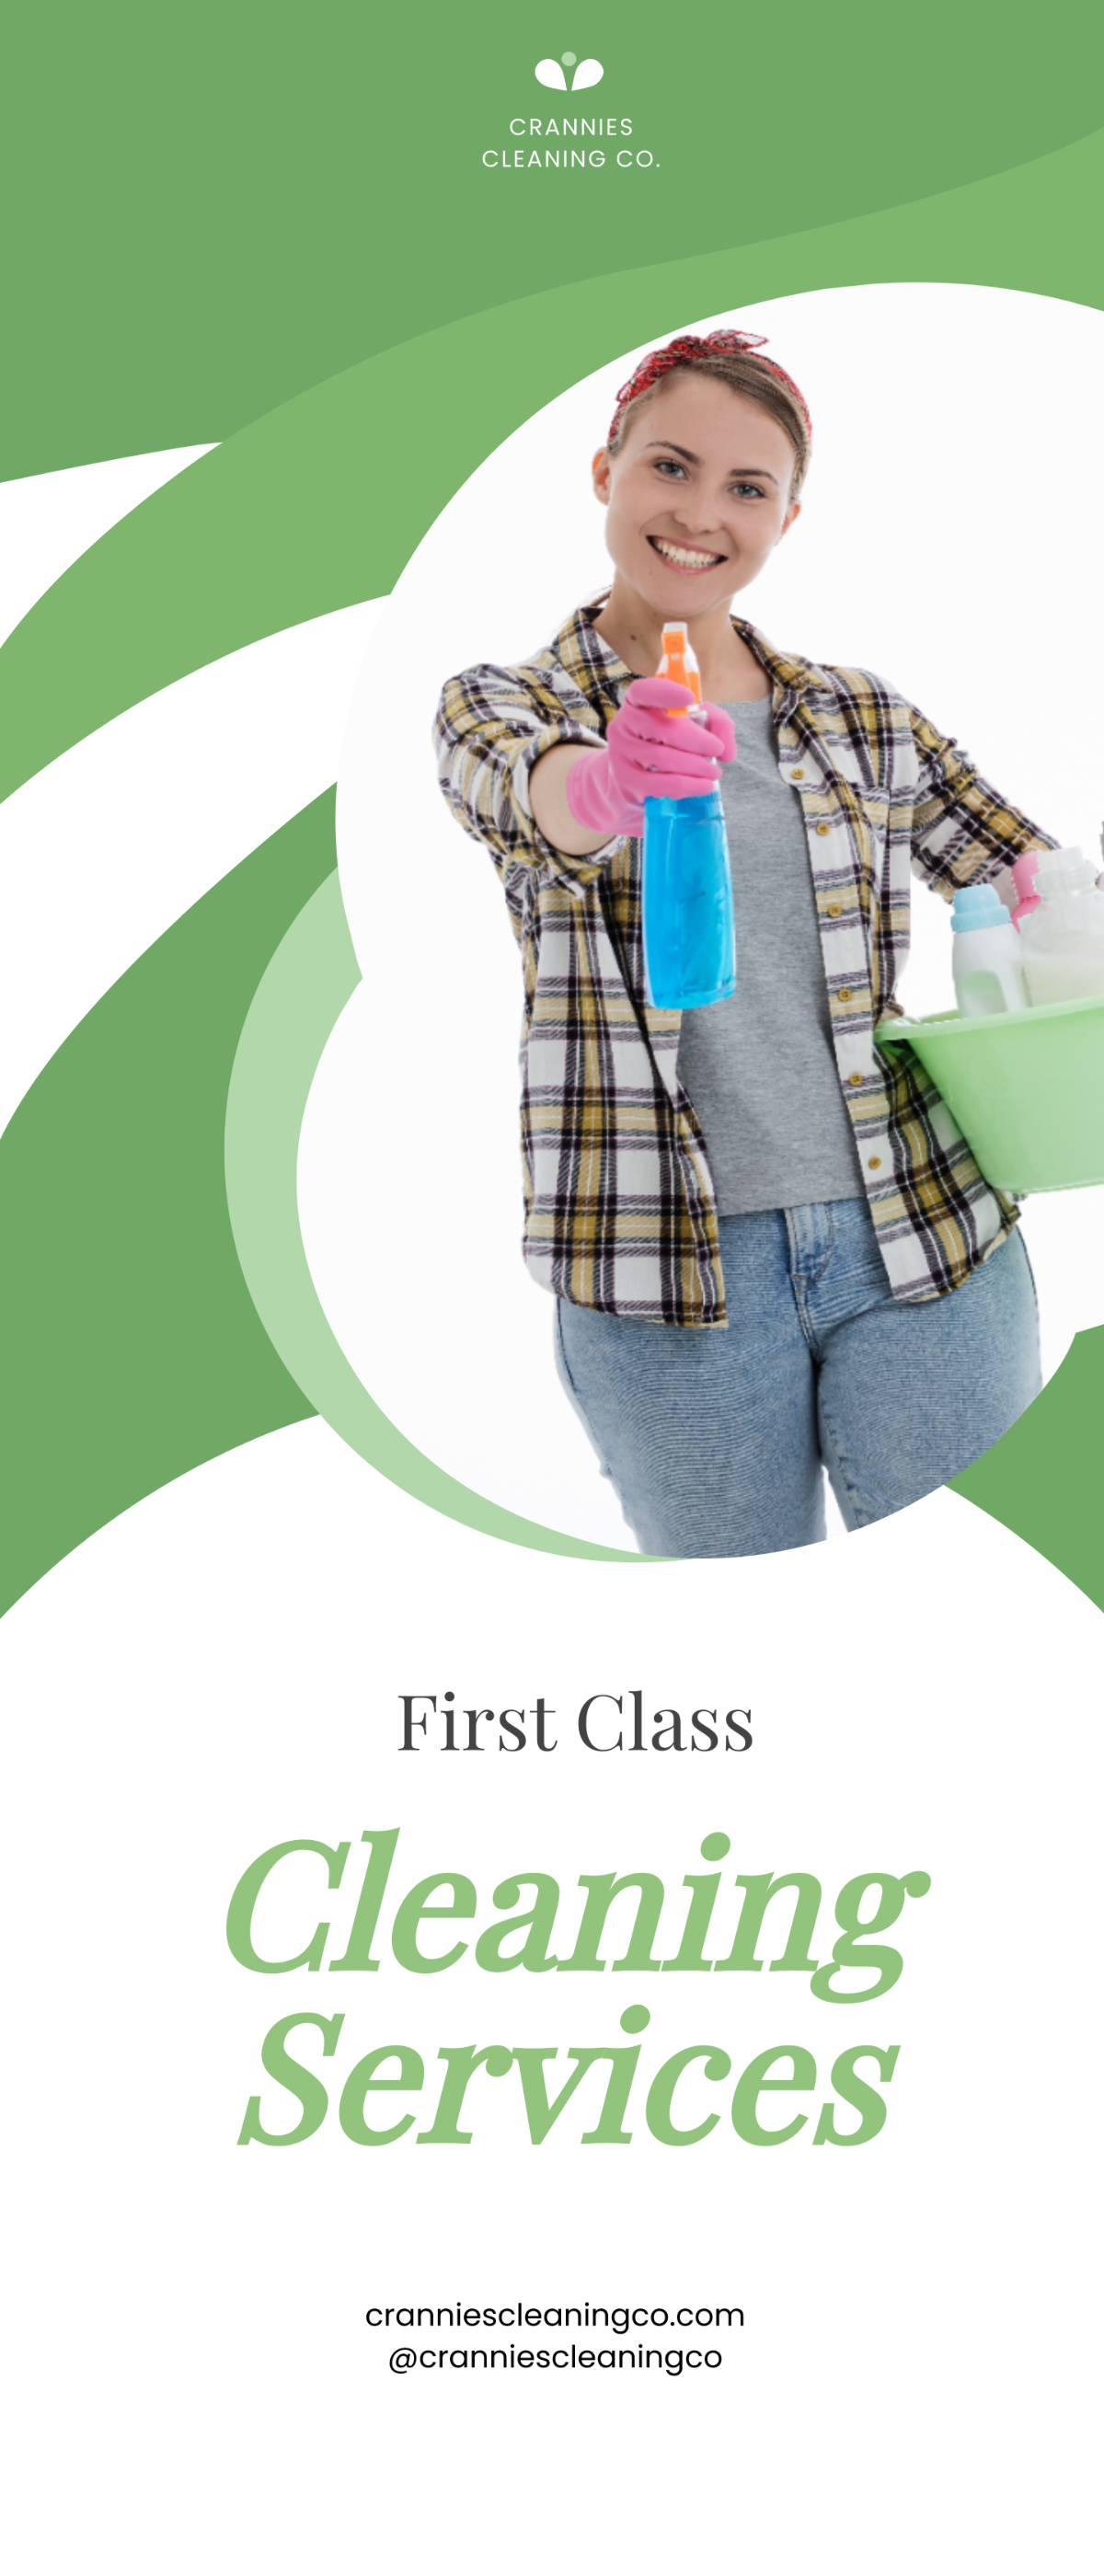 Cleaning & Disinfection Services Roll-Up Template